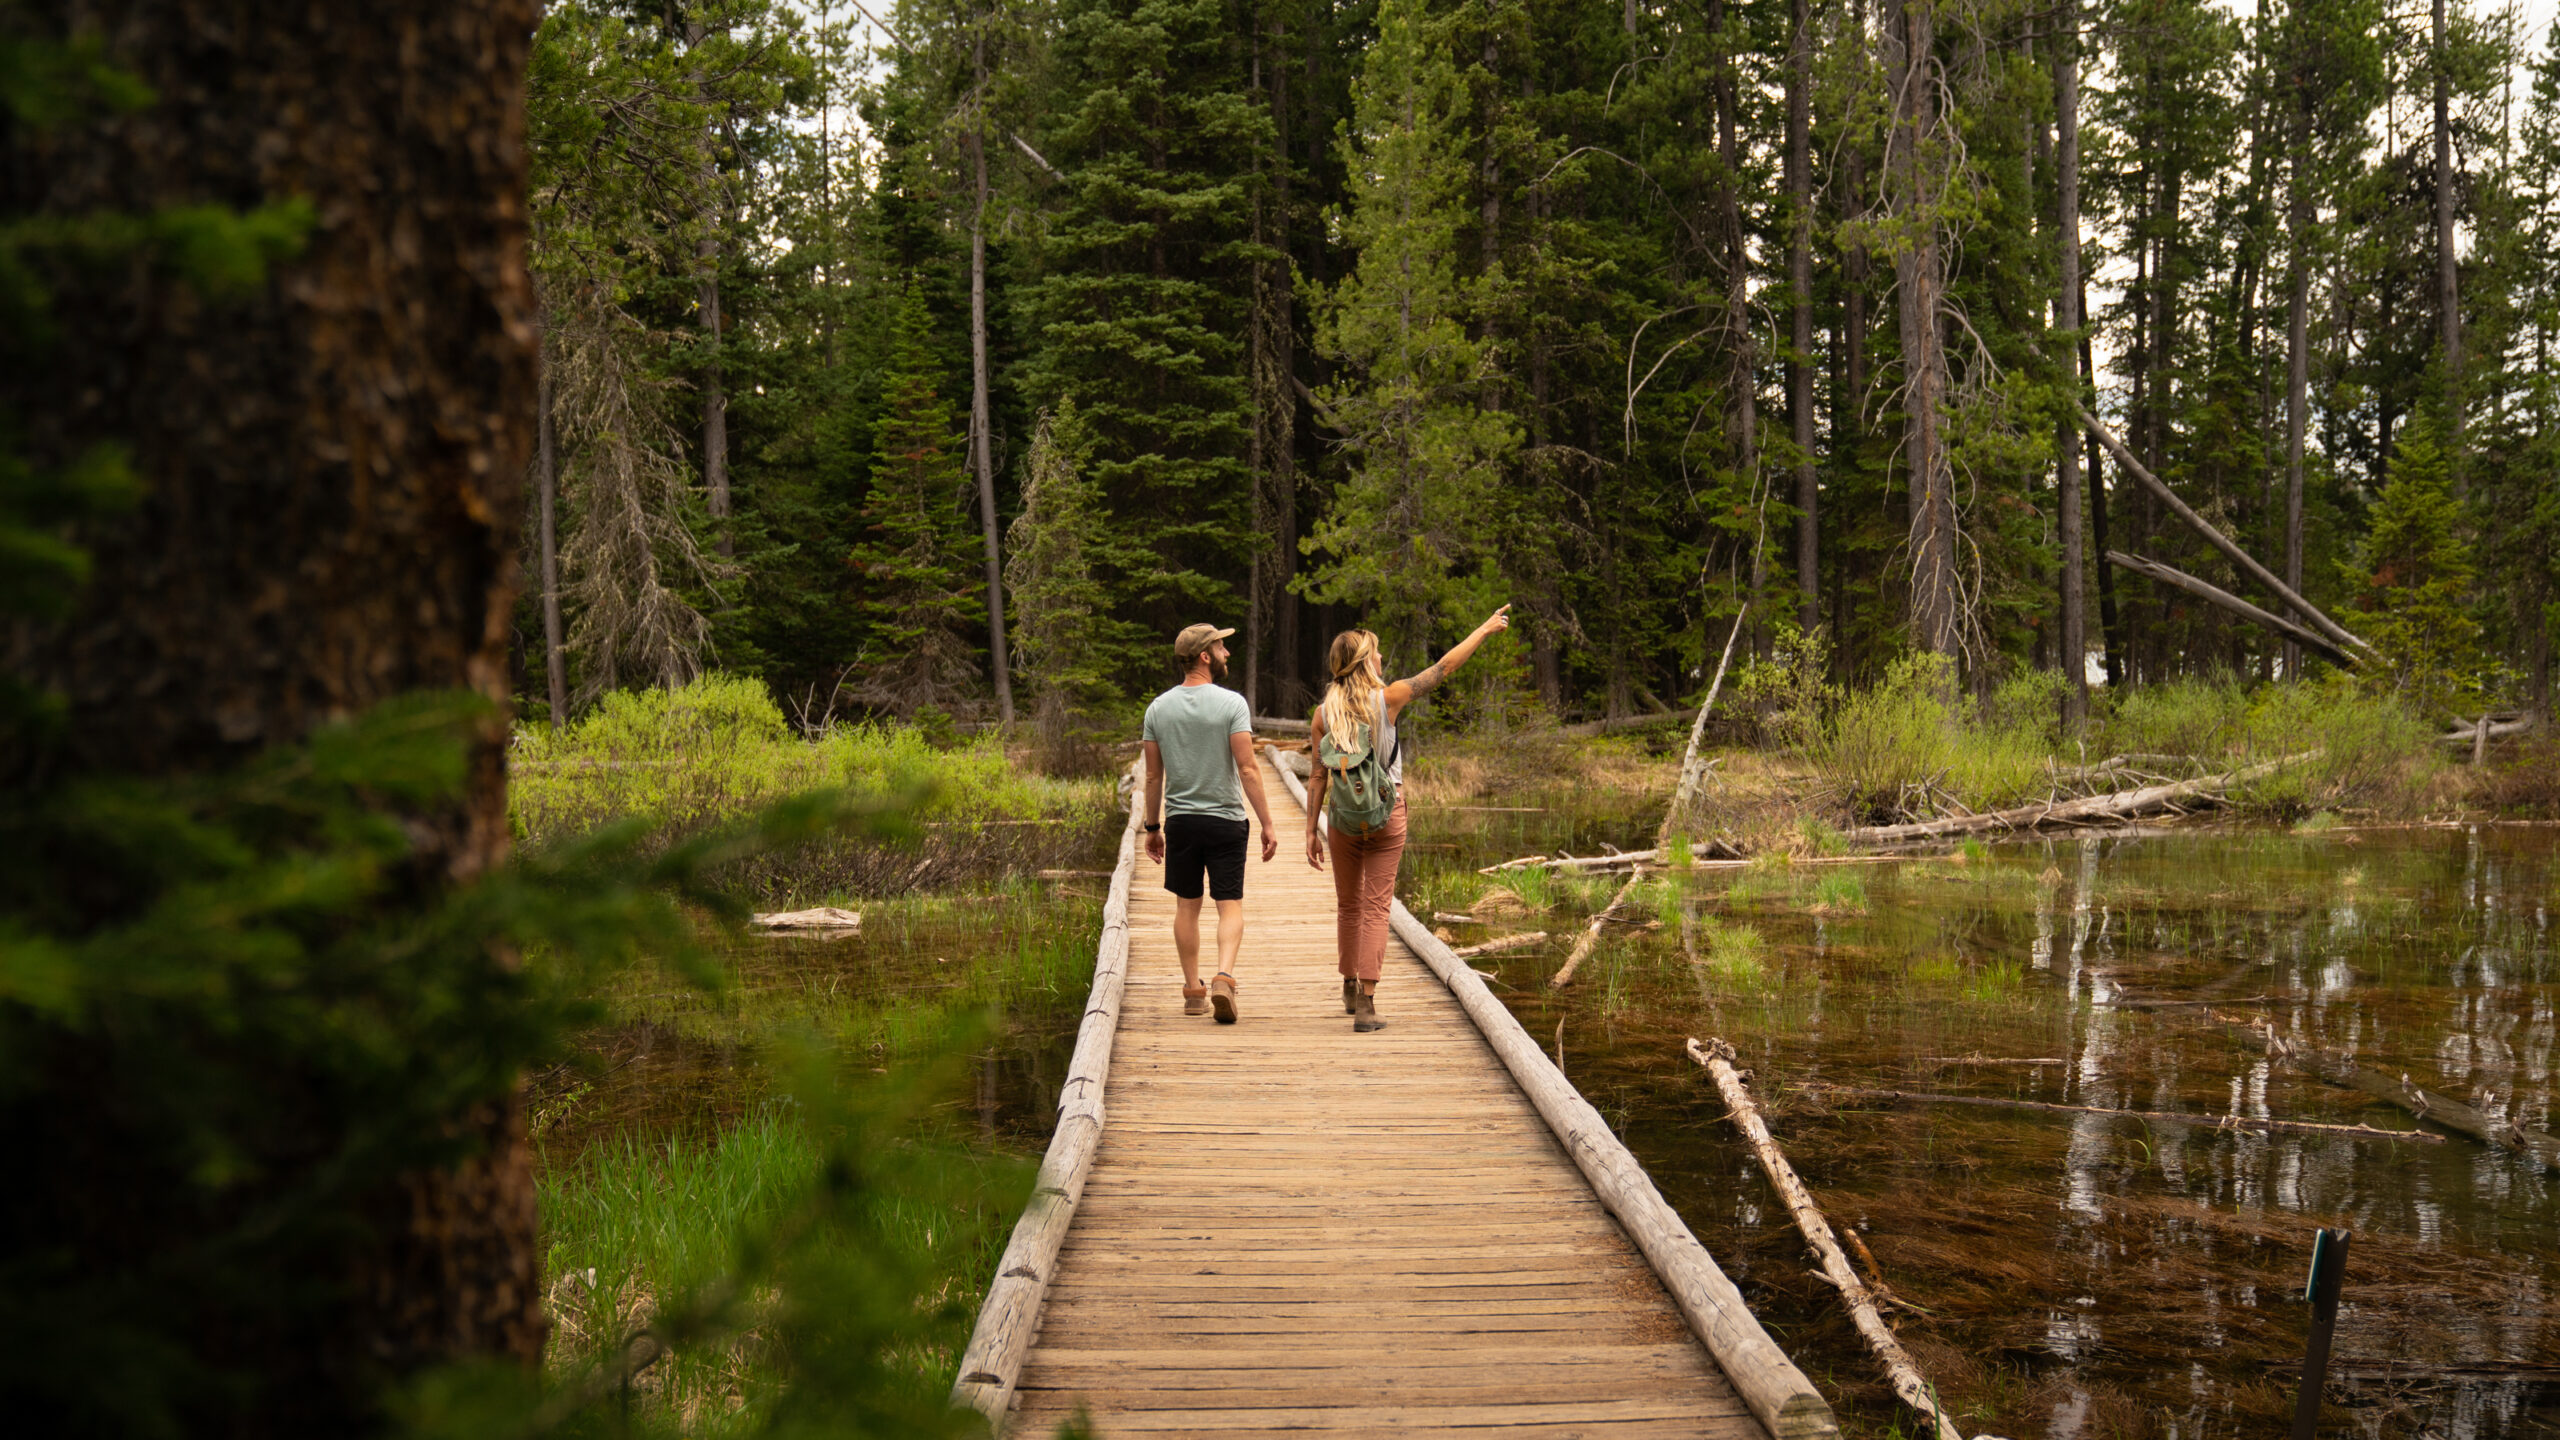 A guy and a girl traveling on a ranch by the pond, admiring the green forest scenery.